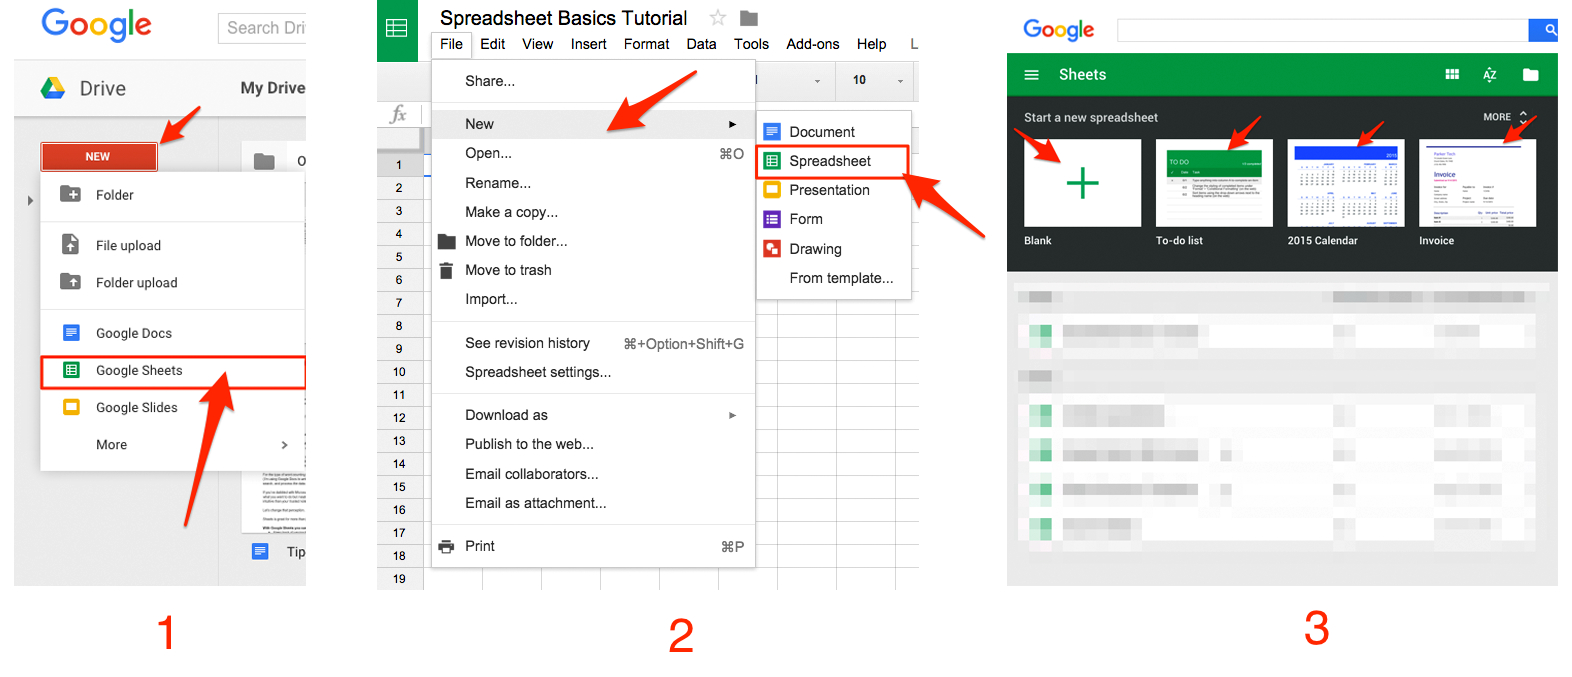 Create Excel Spreadsheet Online With Google Sheets 101: The Beginner's Guide To Online Spreadsheets  The